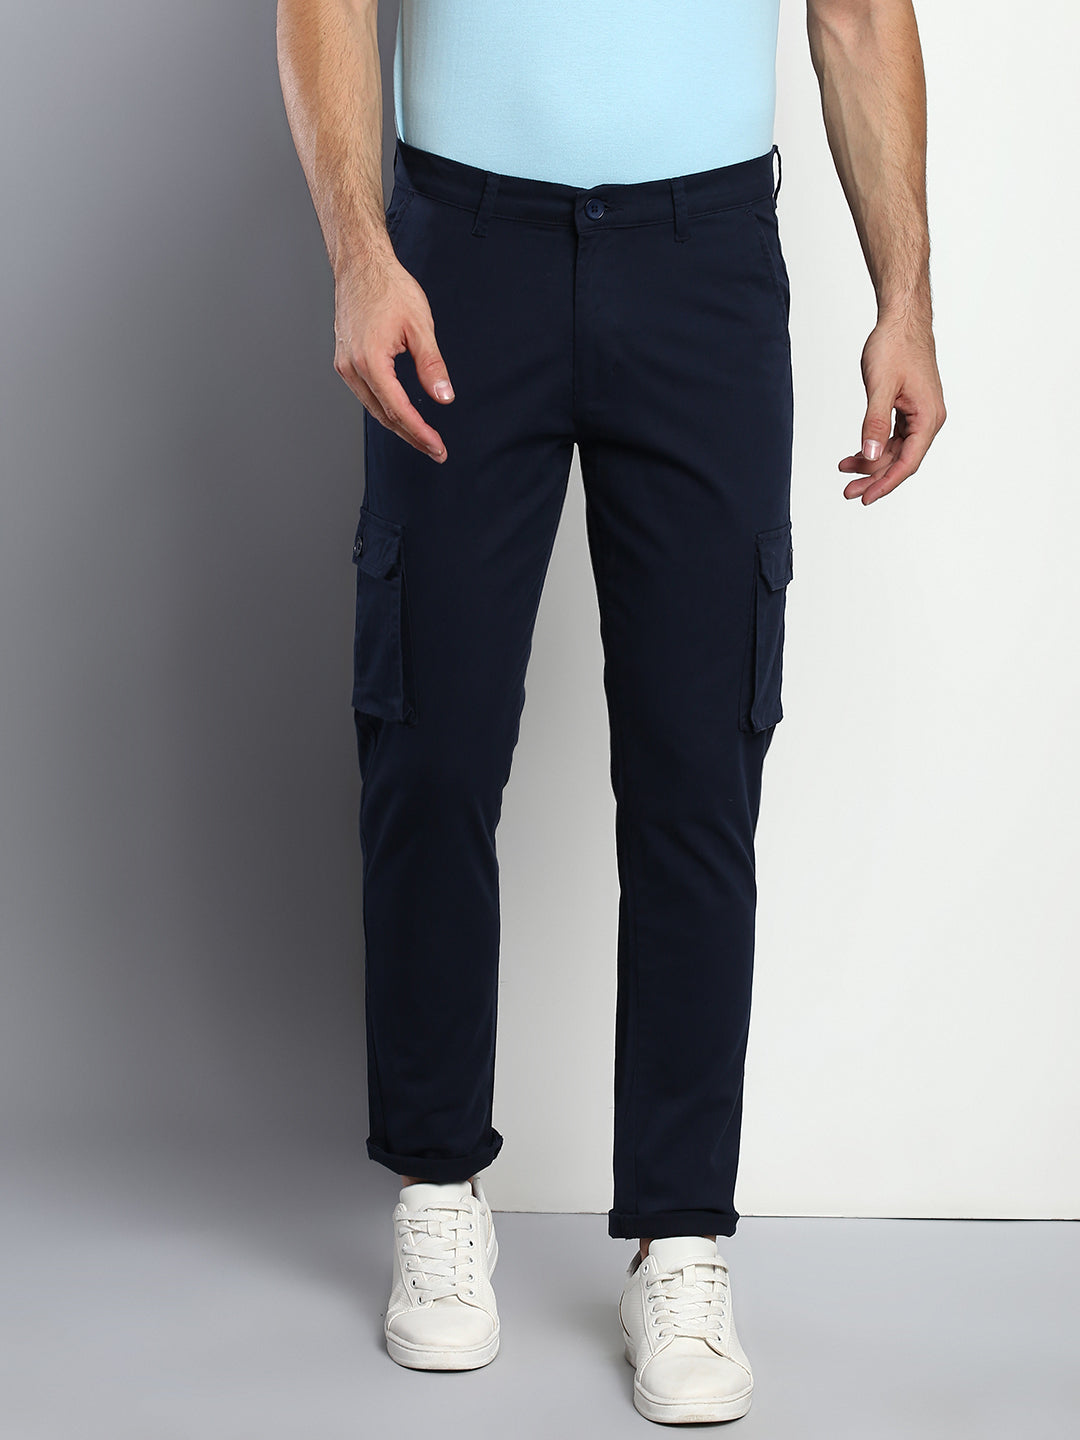 5 Types of Pants Every Guy should Wear by GentWith Blog